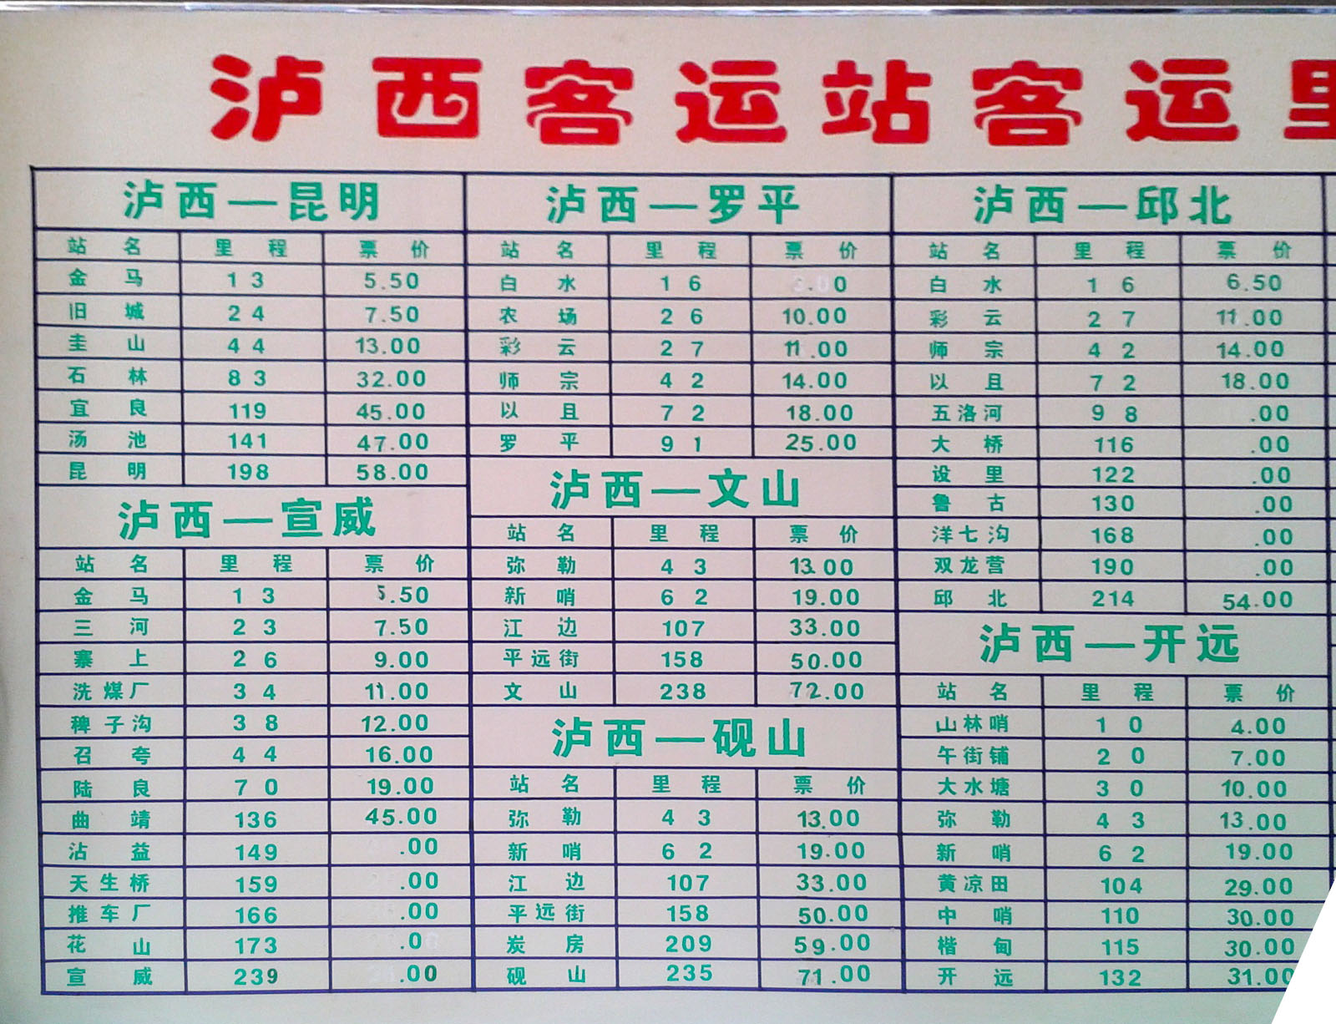 Picture: City busterminal. Frequent connections to Kunming, Mile, Shizong 